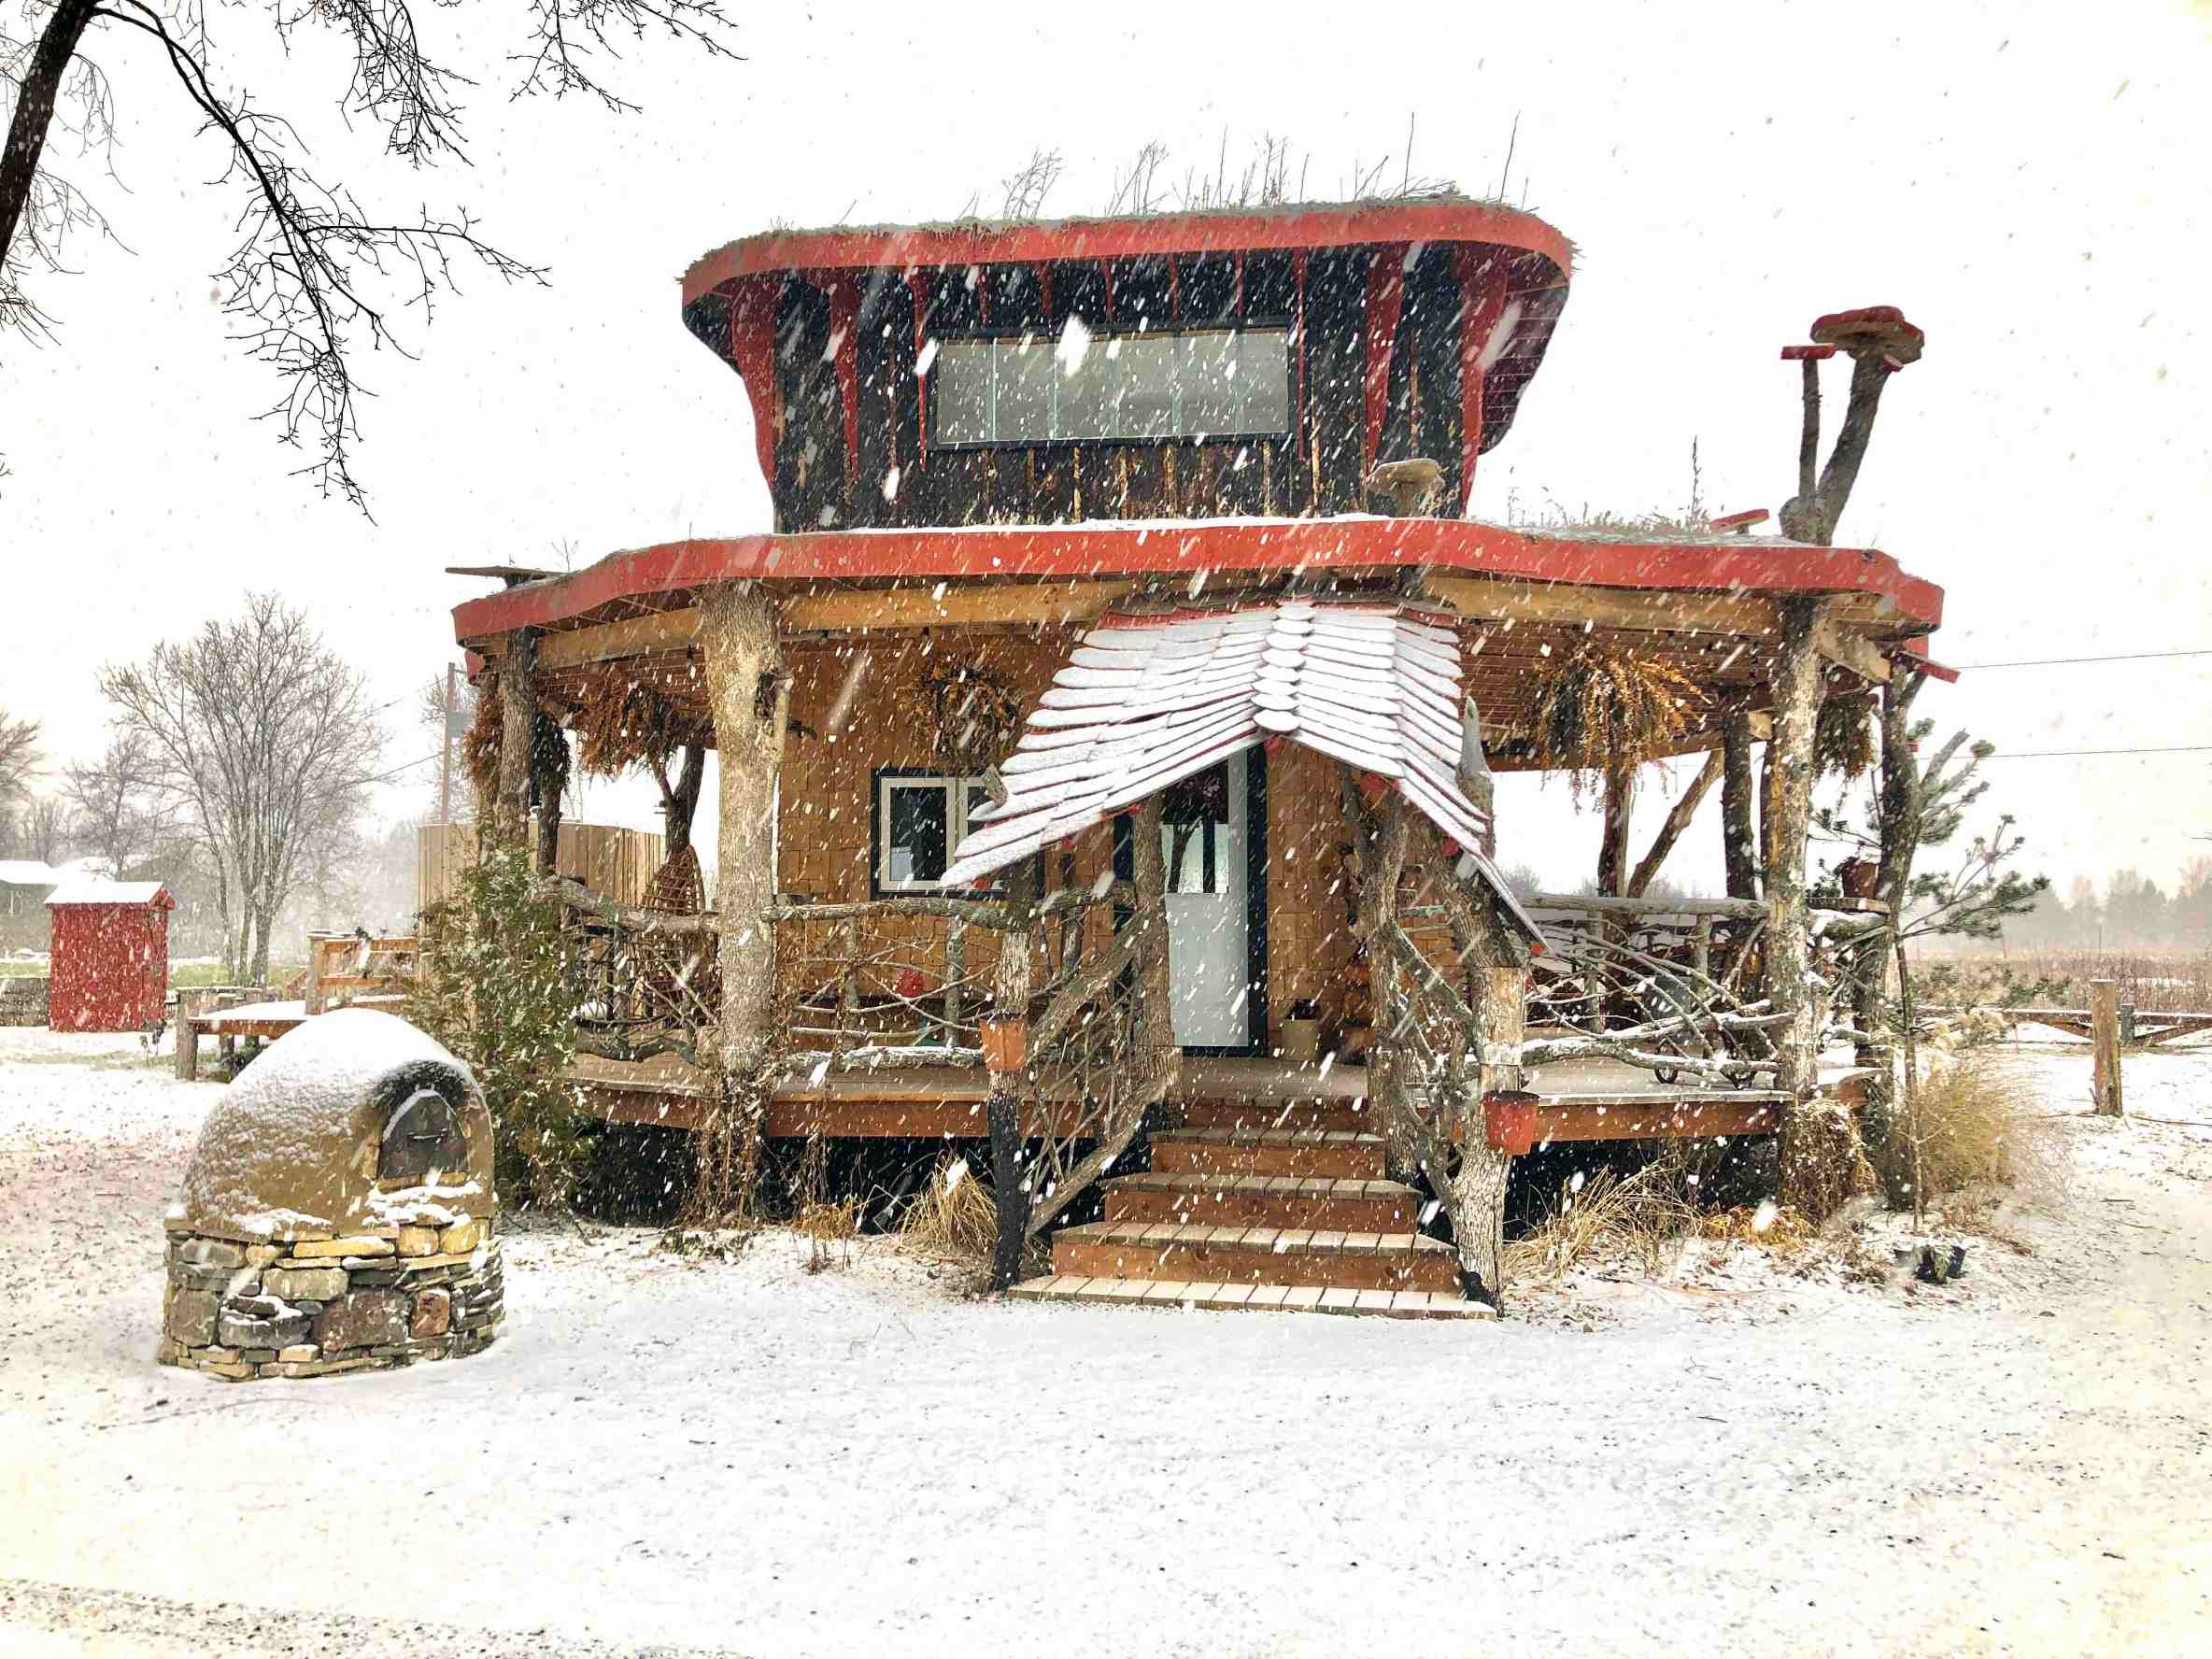 Snow is coming down on a unique wooden house, capped with mushrooms statues. 